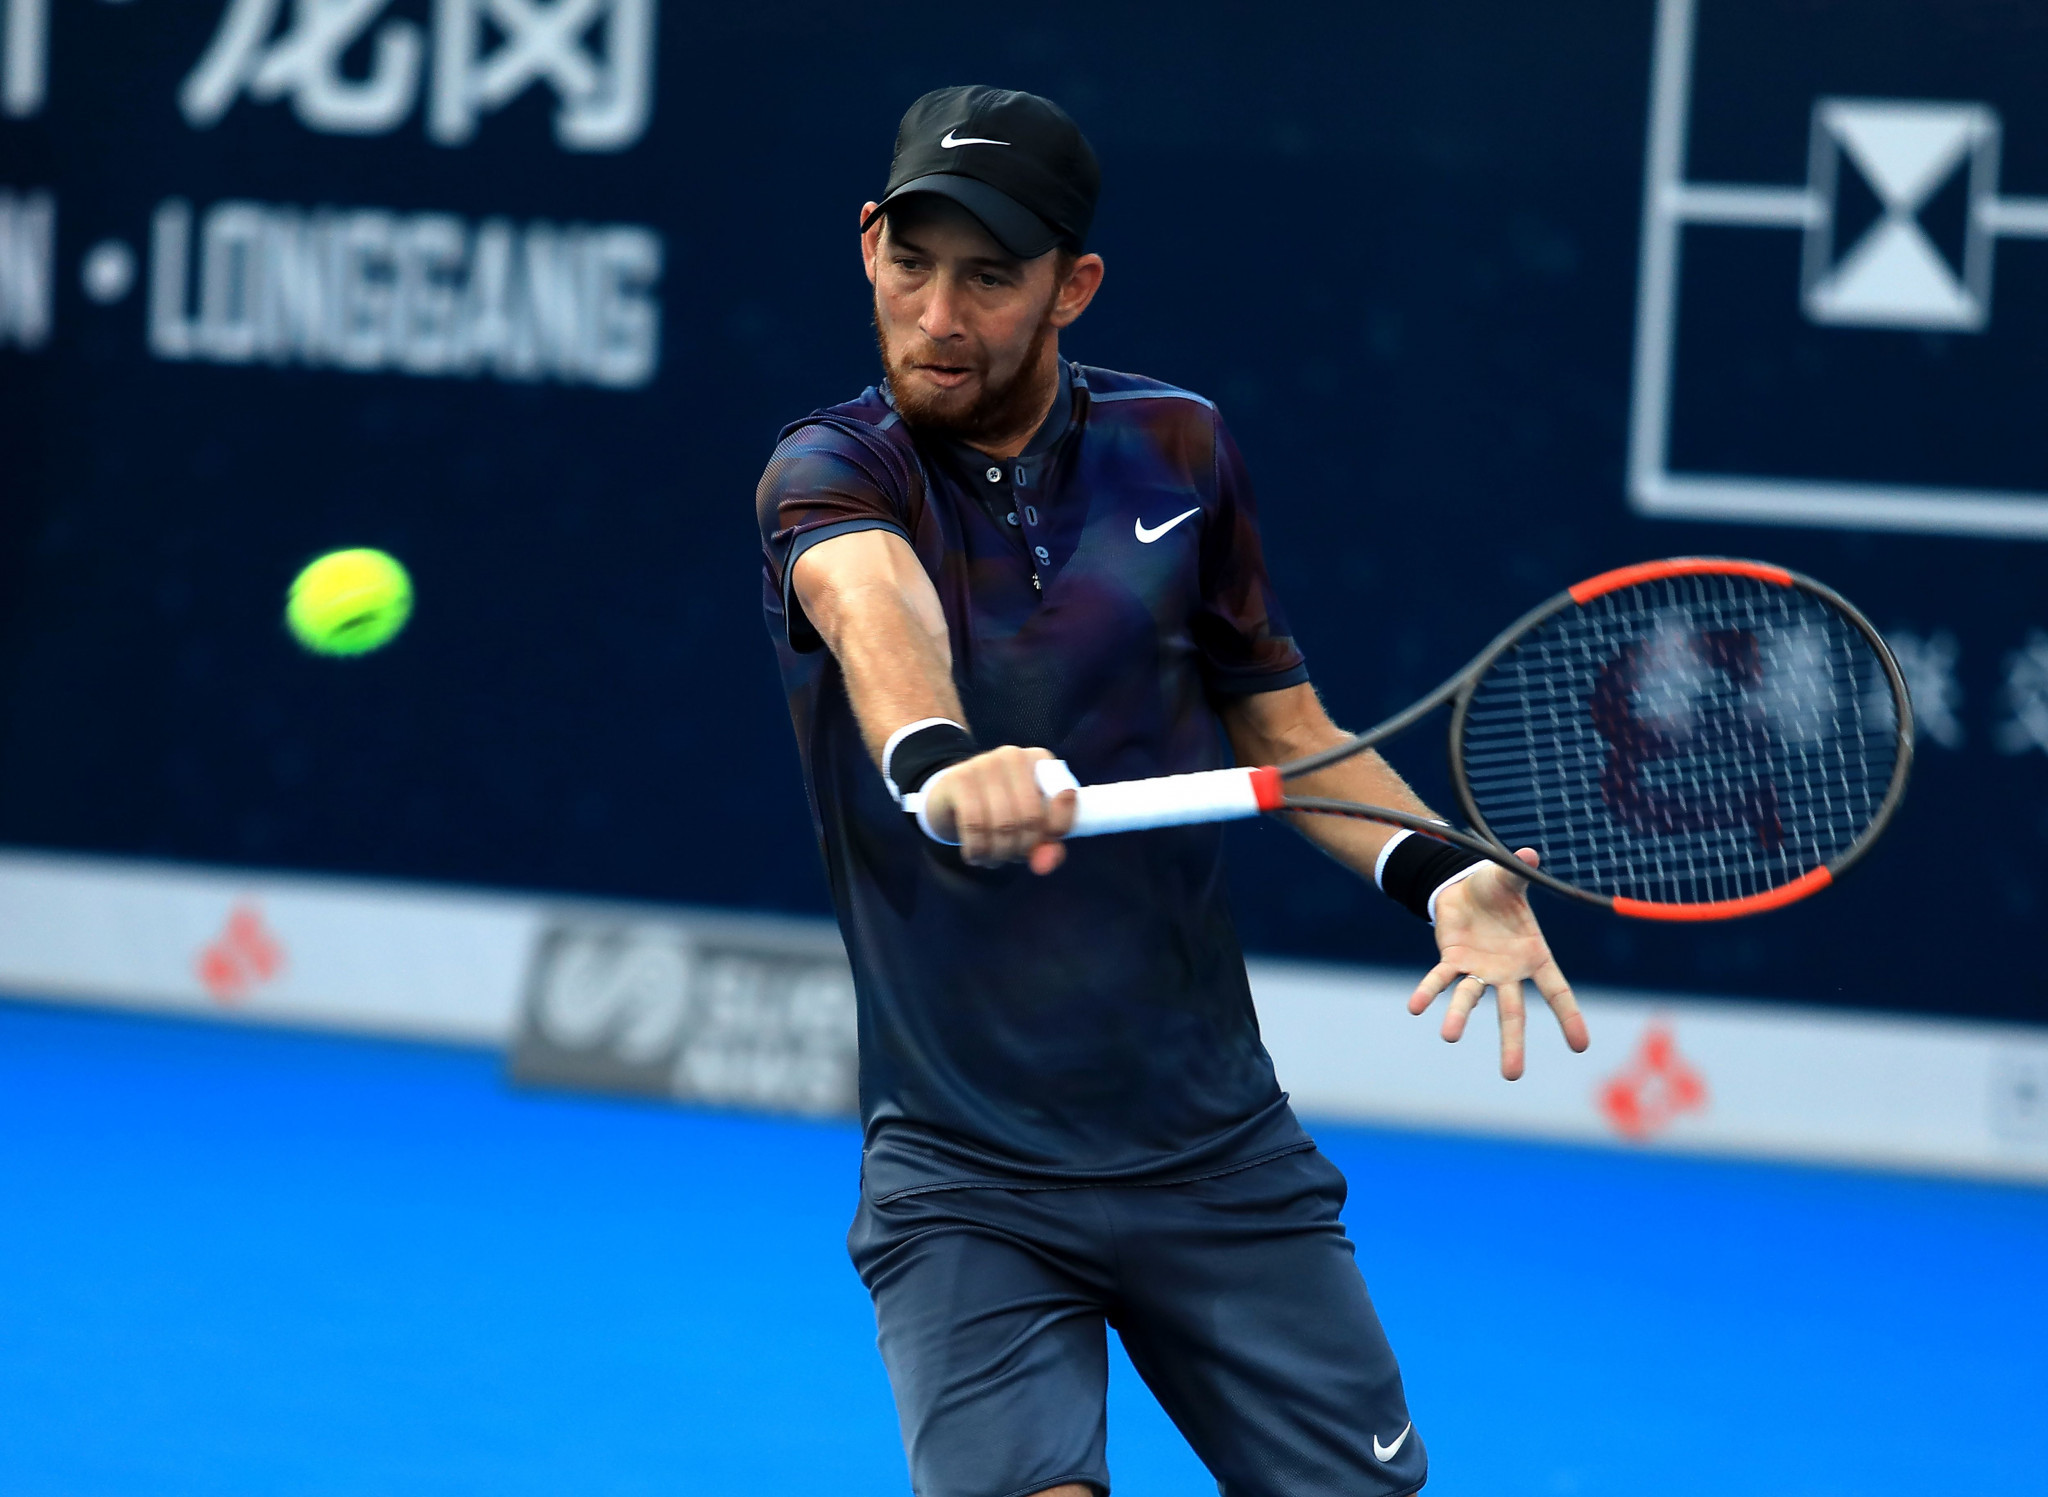 Dudi Sela reportedly withdrew from the quarter-final to observe Yom Kippur ©Getty Images